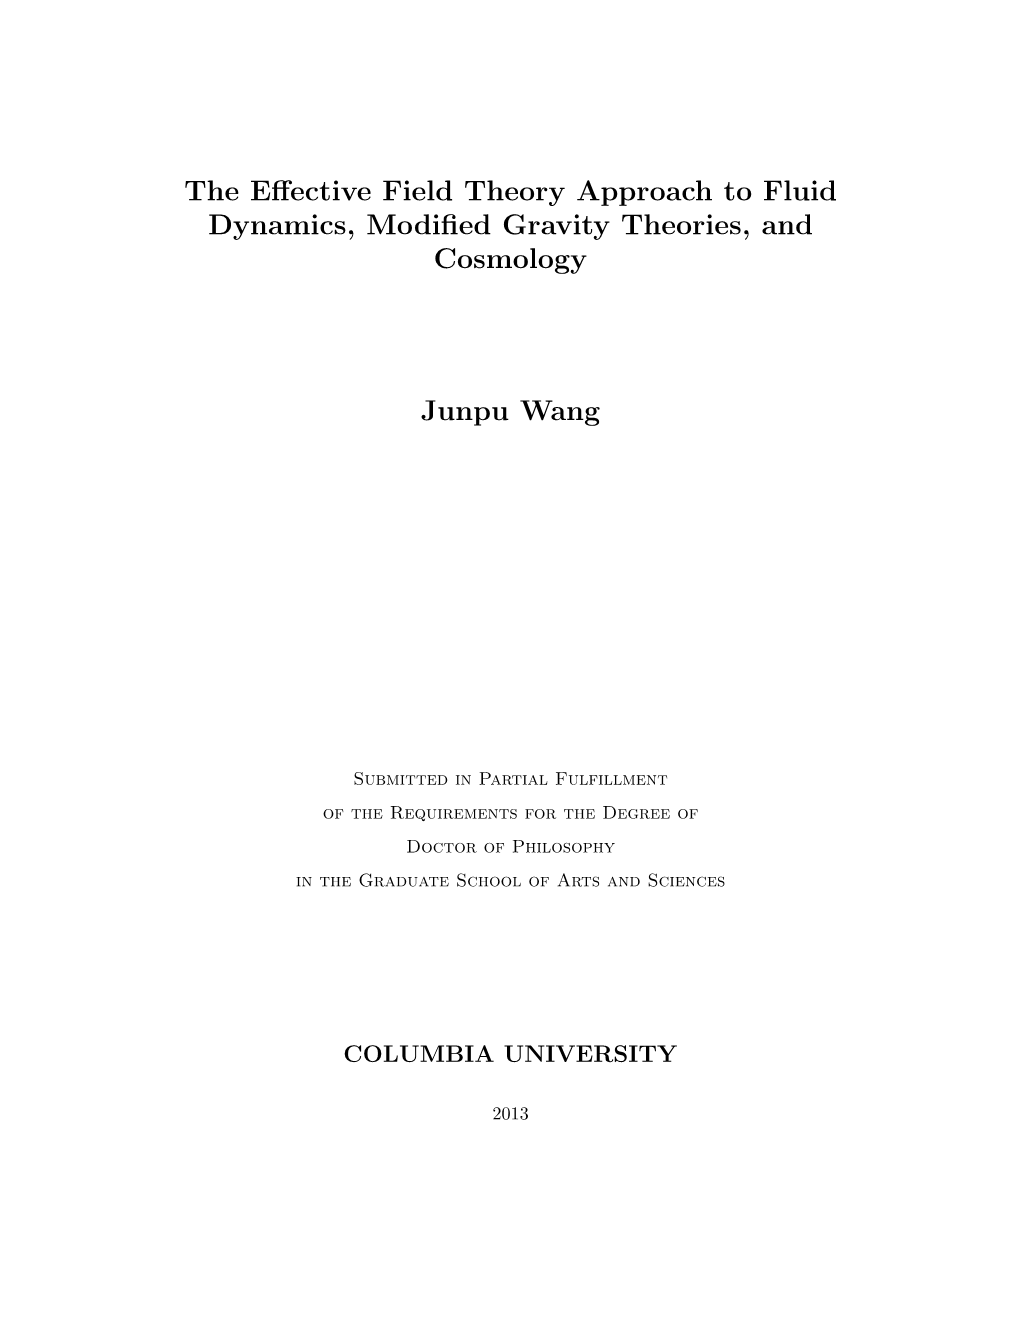 The Effective Field Theory Approach to Fluid Dynamics, Modified Gravity